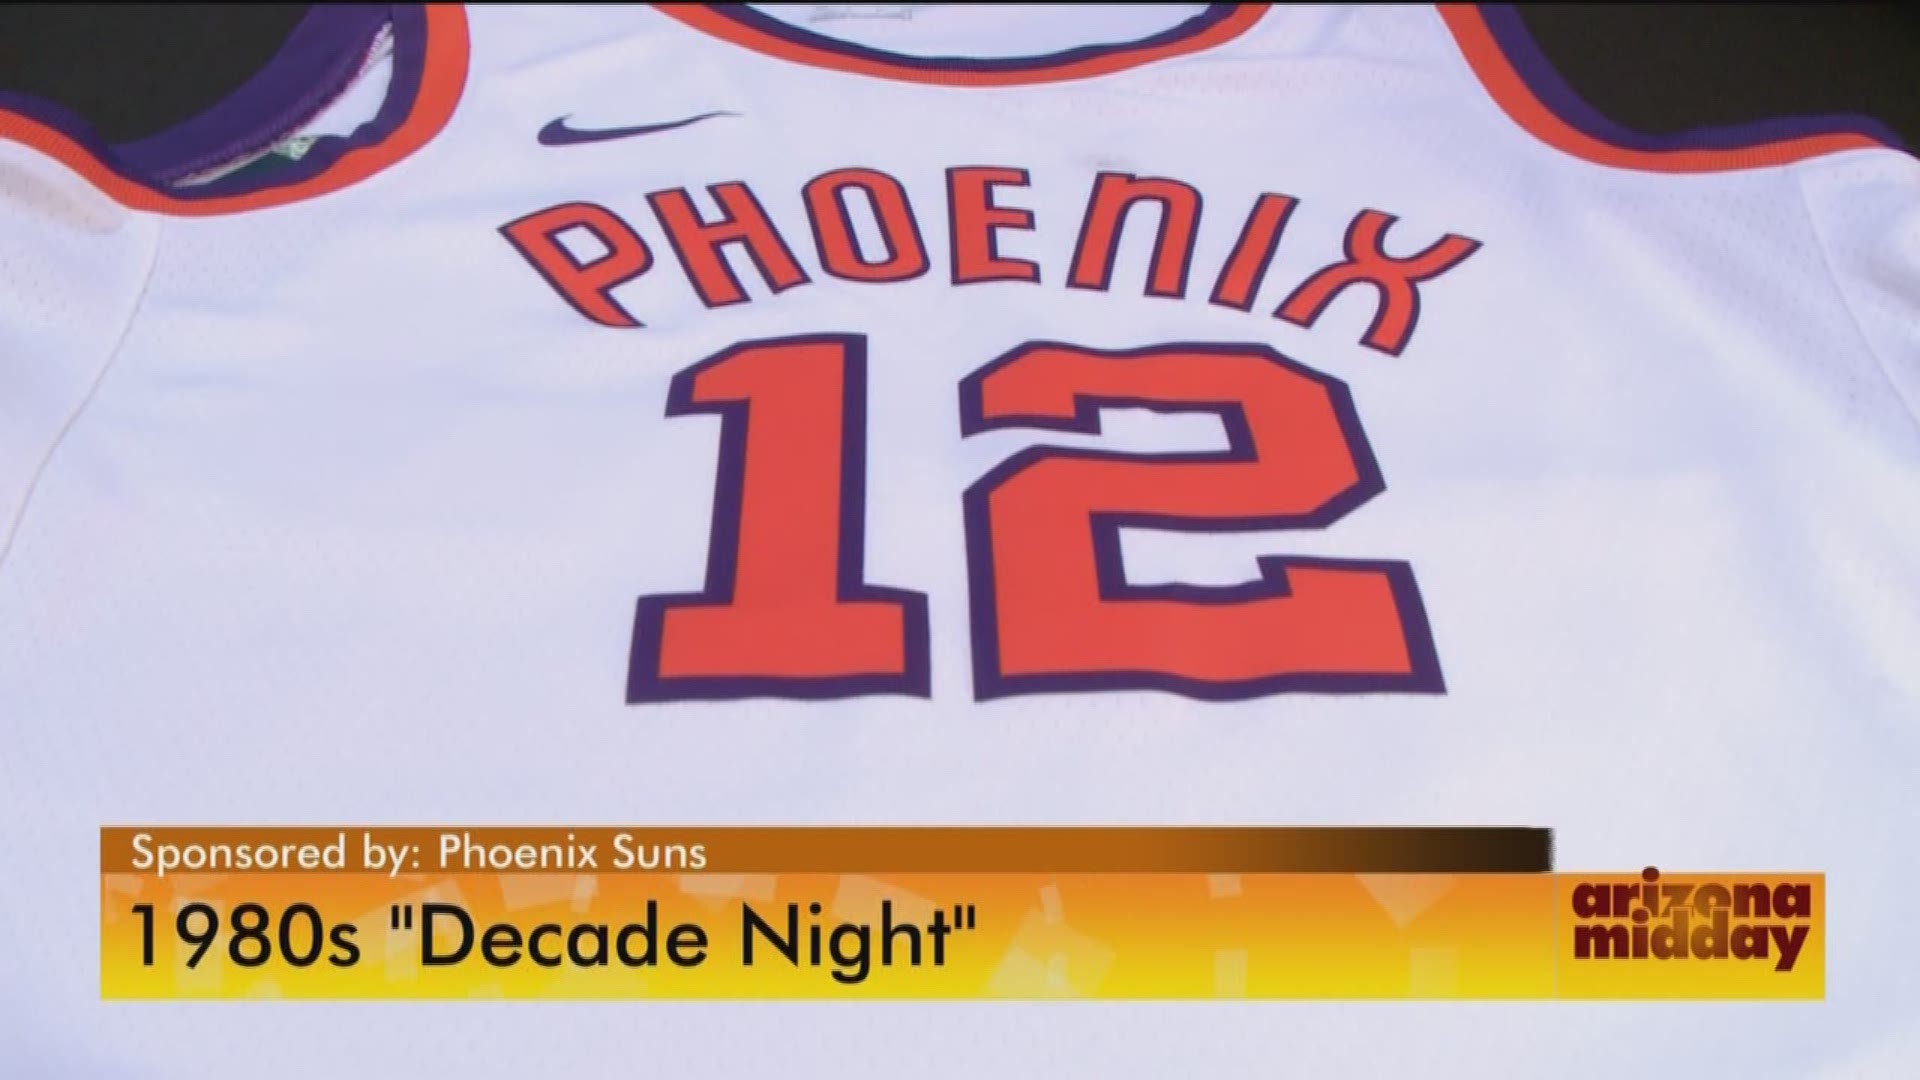 Celebrate the 80s with the Phoenix Suns Saturday (Dec. 9) at Talking Stick Resort Arena.